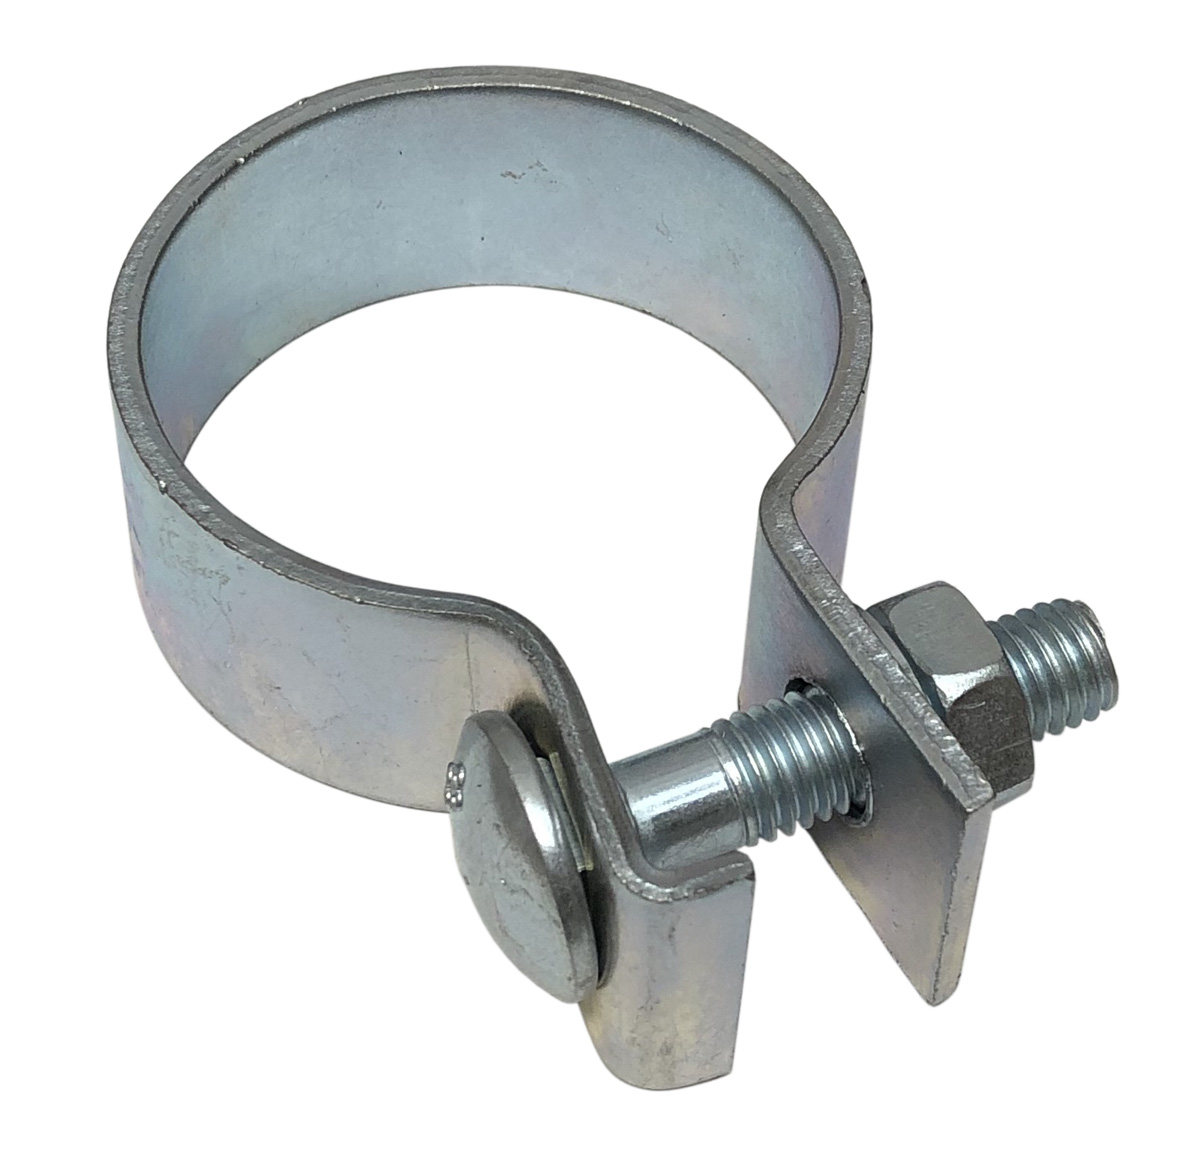 Galvanised Ring clamp [2 inch]. Fits the swaged end of a 50.8mm/2 inch pipe  or a 54mm external diameter pipe.